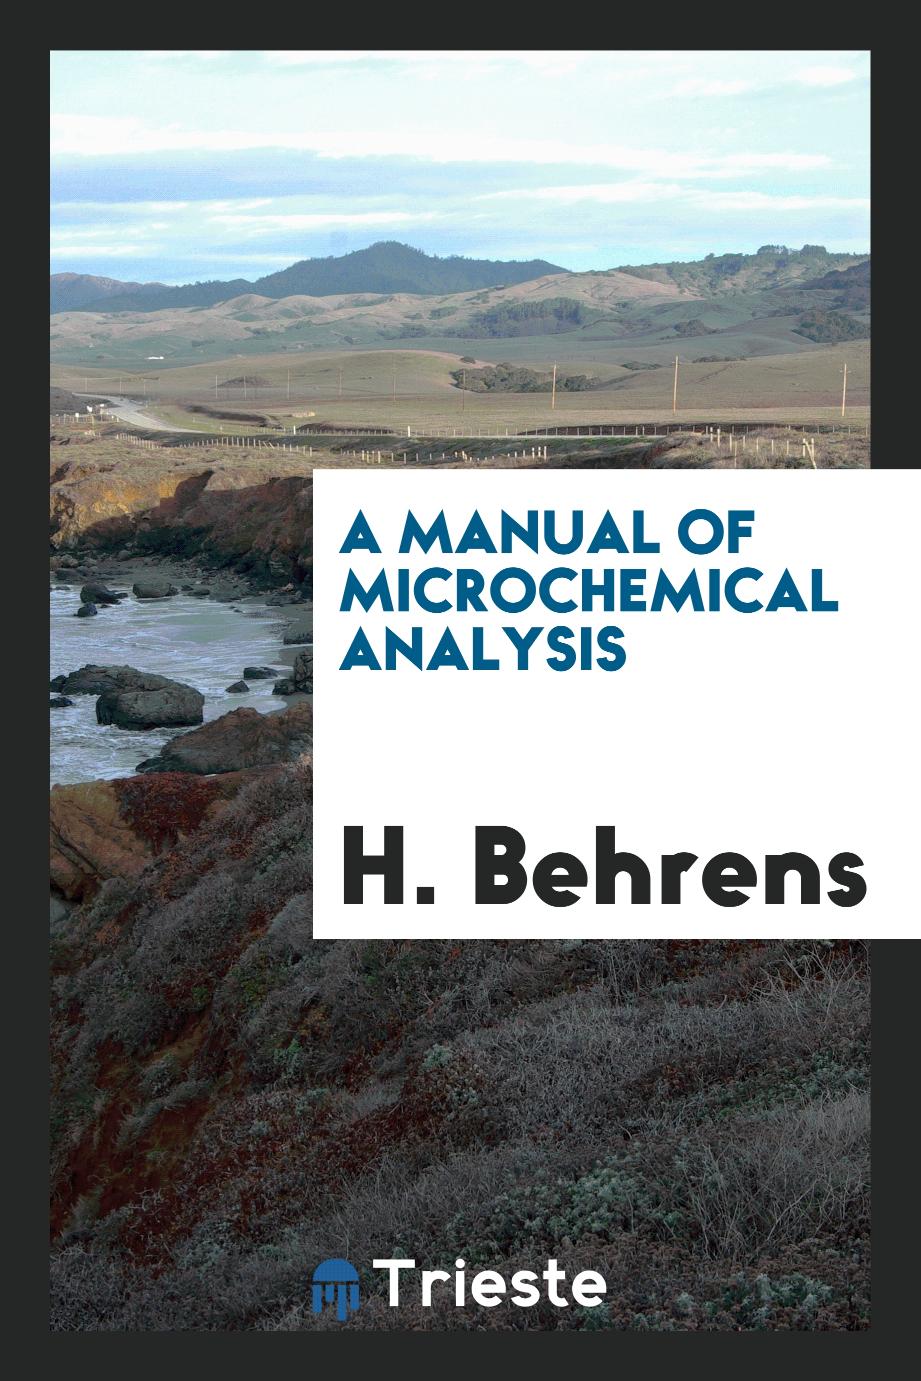 A manual of microchemical analysis